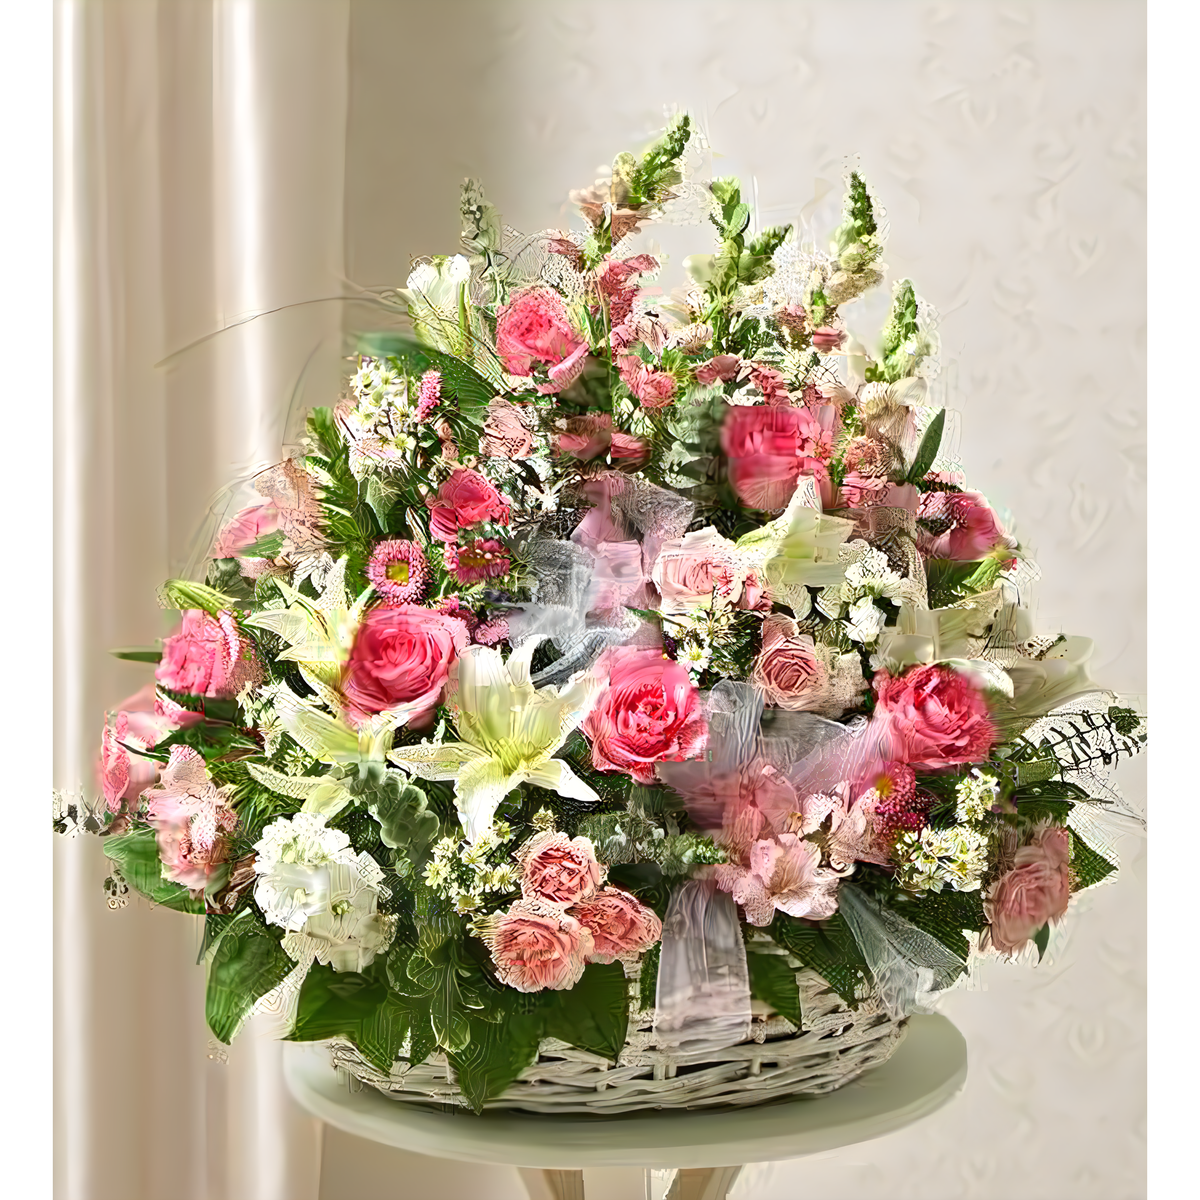 NYC Flower Delivery - Pink and White Sympathy Arrangement in Basket - Funeral &gt; For the Service